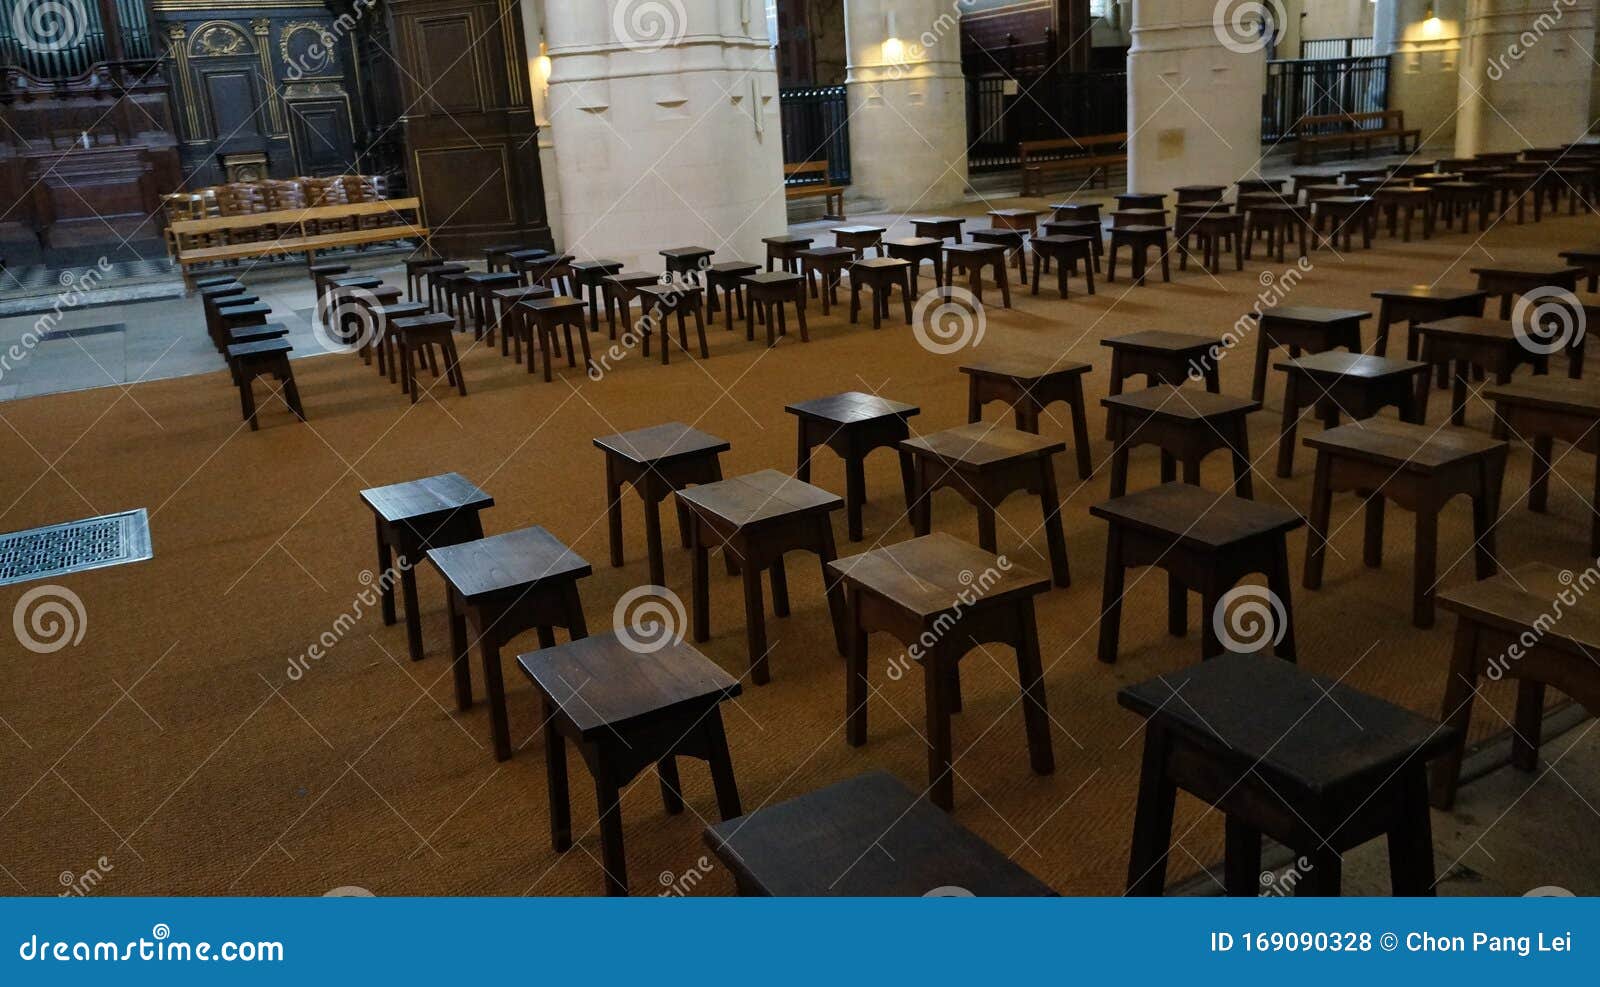 Wooden Chairs Listing In A Church Stock Photo Image Of